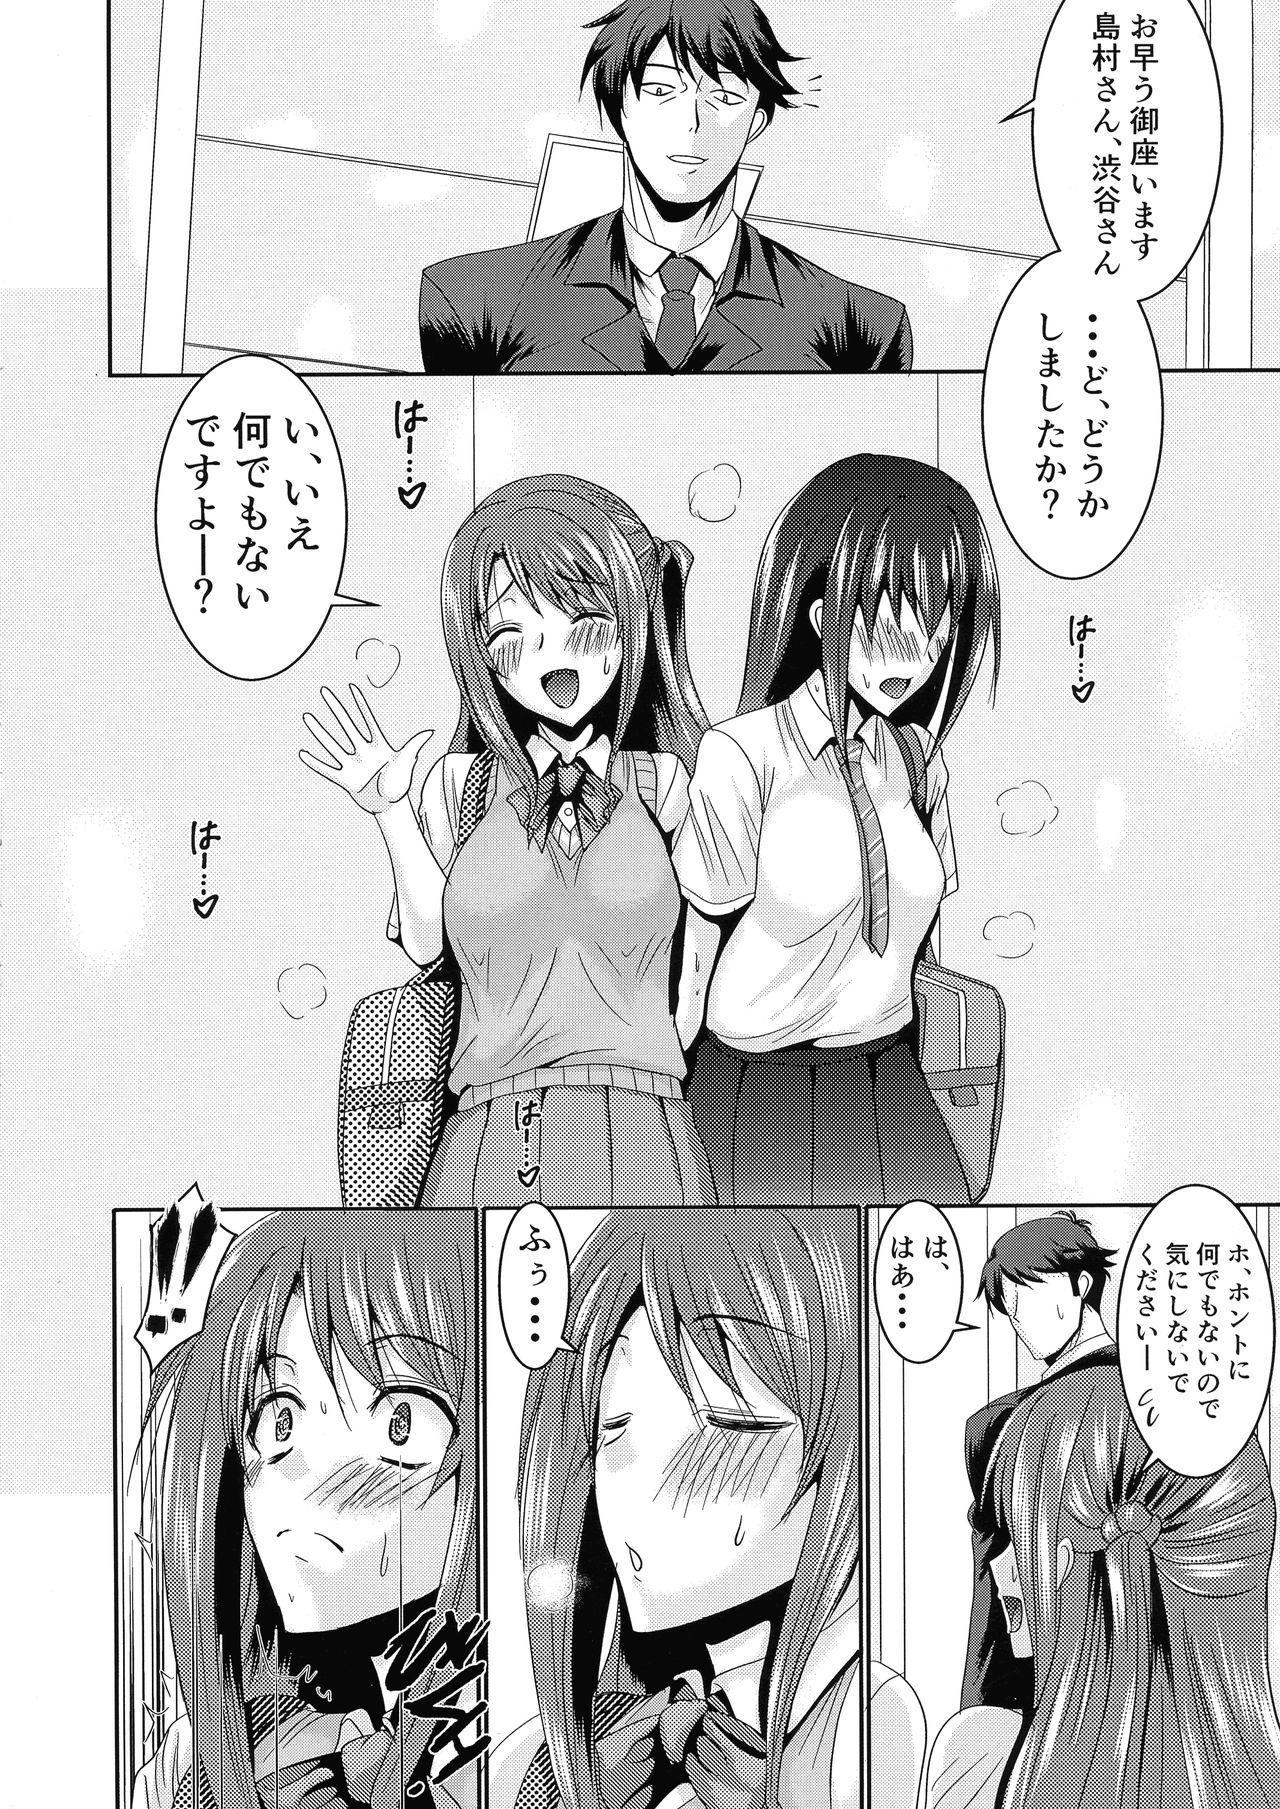 Blowjobs SCANDAL GIRLS 2 - The idolmaster Bathroom - Page 8